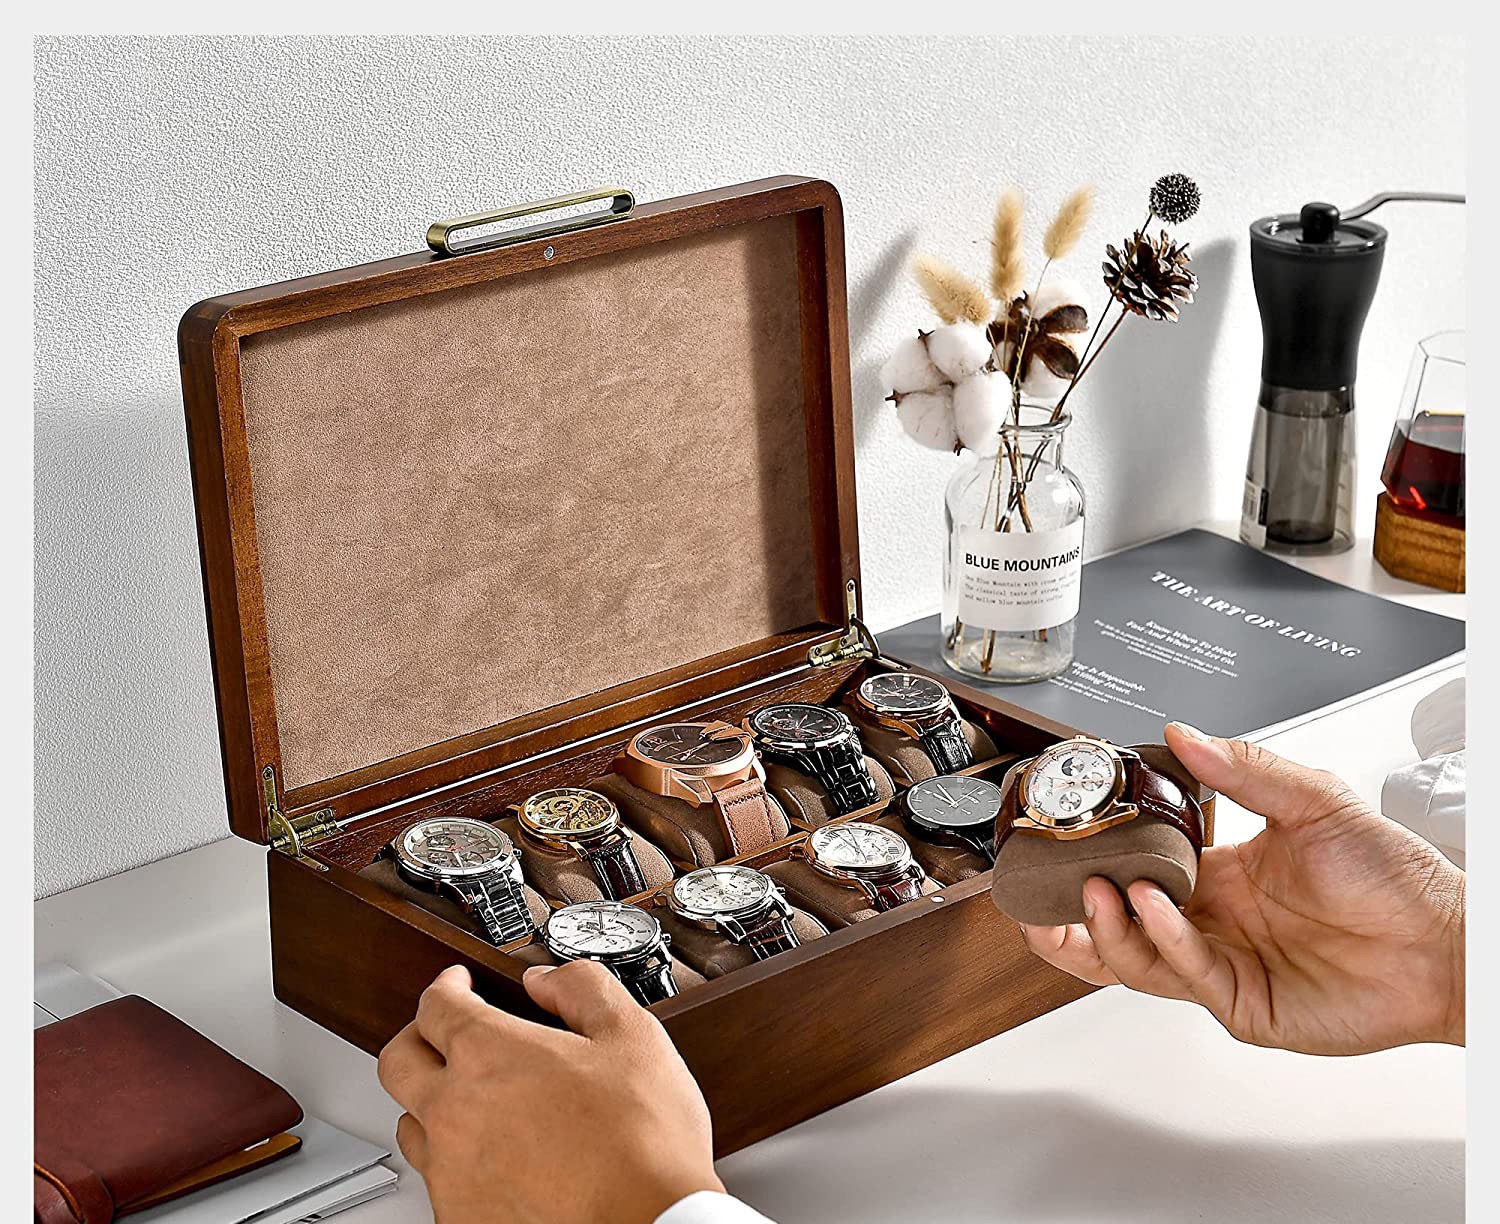 Handmade Rustic Jewelry Organizer: A Functional and Stylish Storage Solution